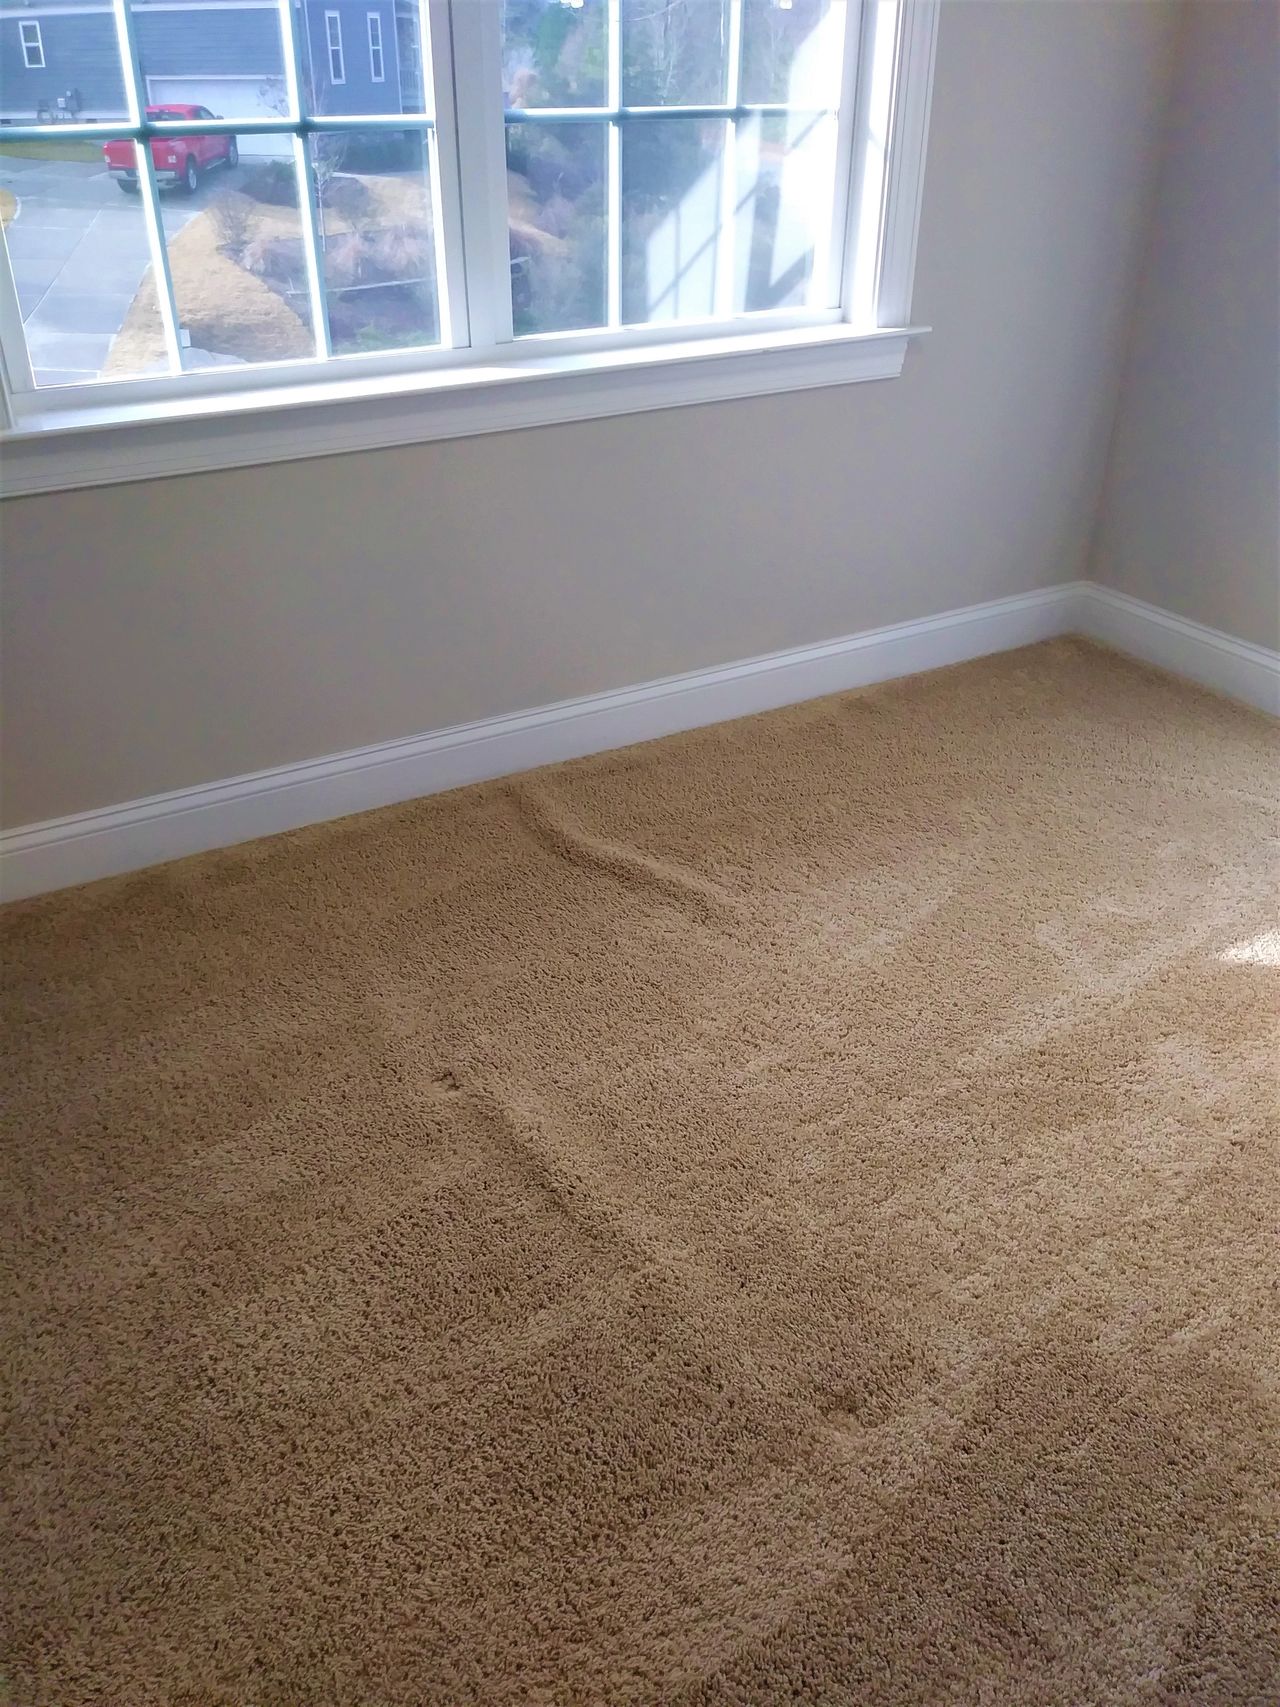 Benefits Of Carpet Repair And Restretching Services